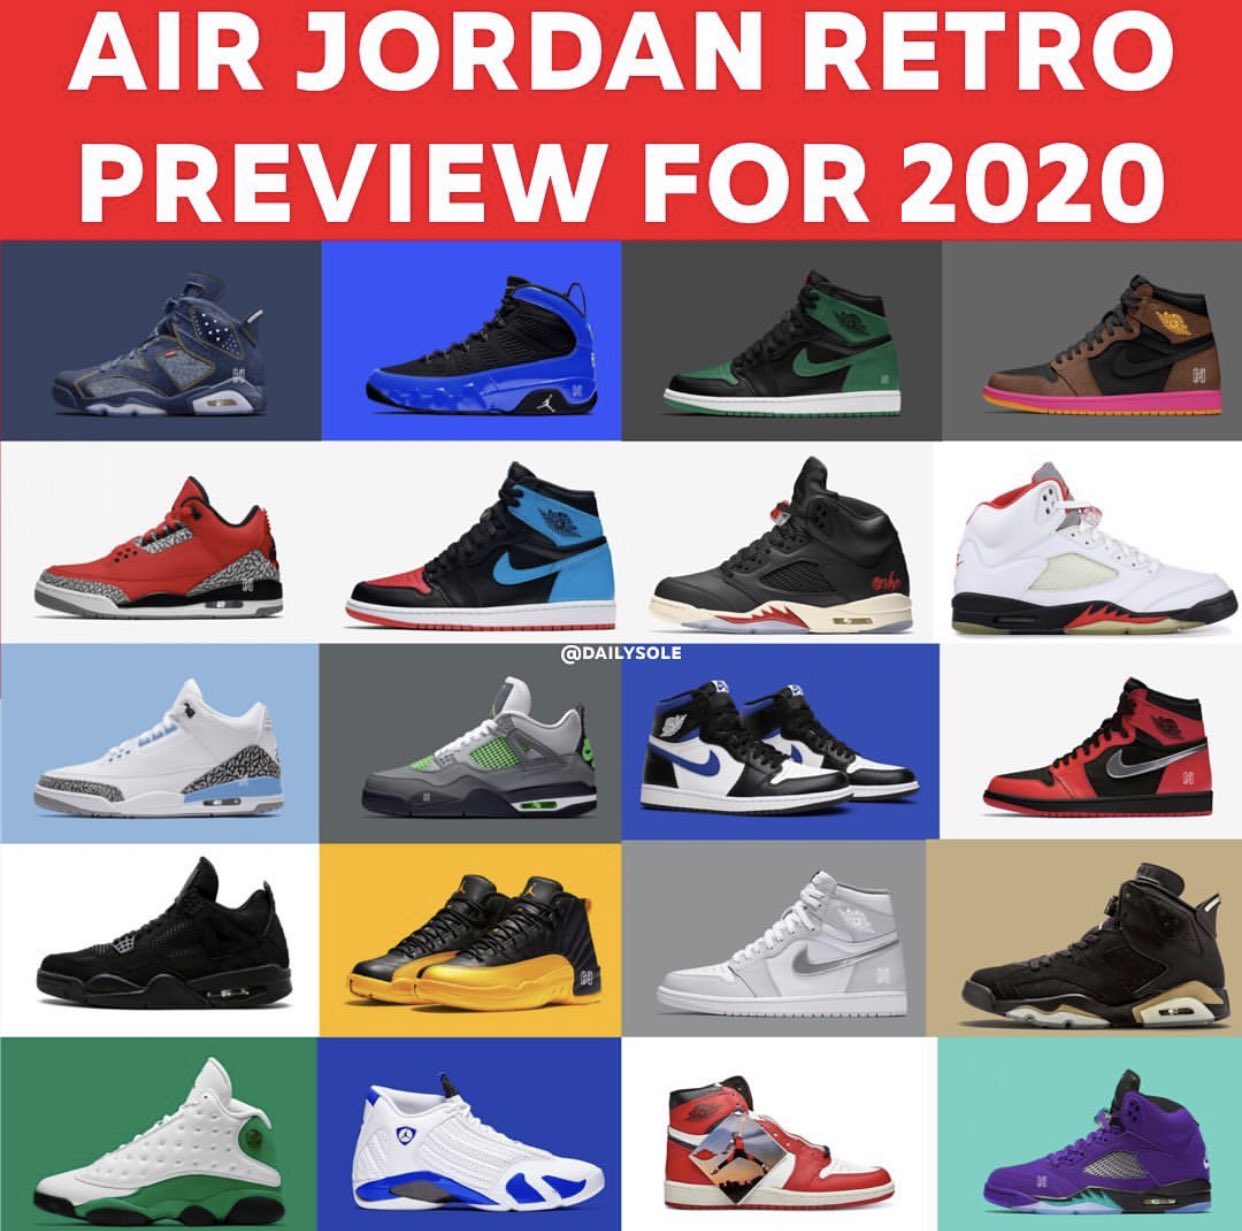 angreb tilbage I hele verden SneakerFiles.com on Twitter: "Some of the 2020 Air Jordan Releases. How's  it looking so far? https://t.co/on5nvE8t80 https://t.co/nllKFX9Z7c" /  Twitter